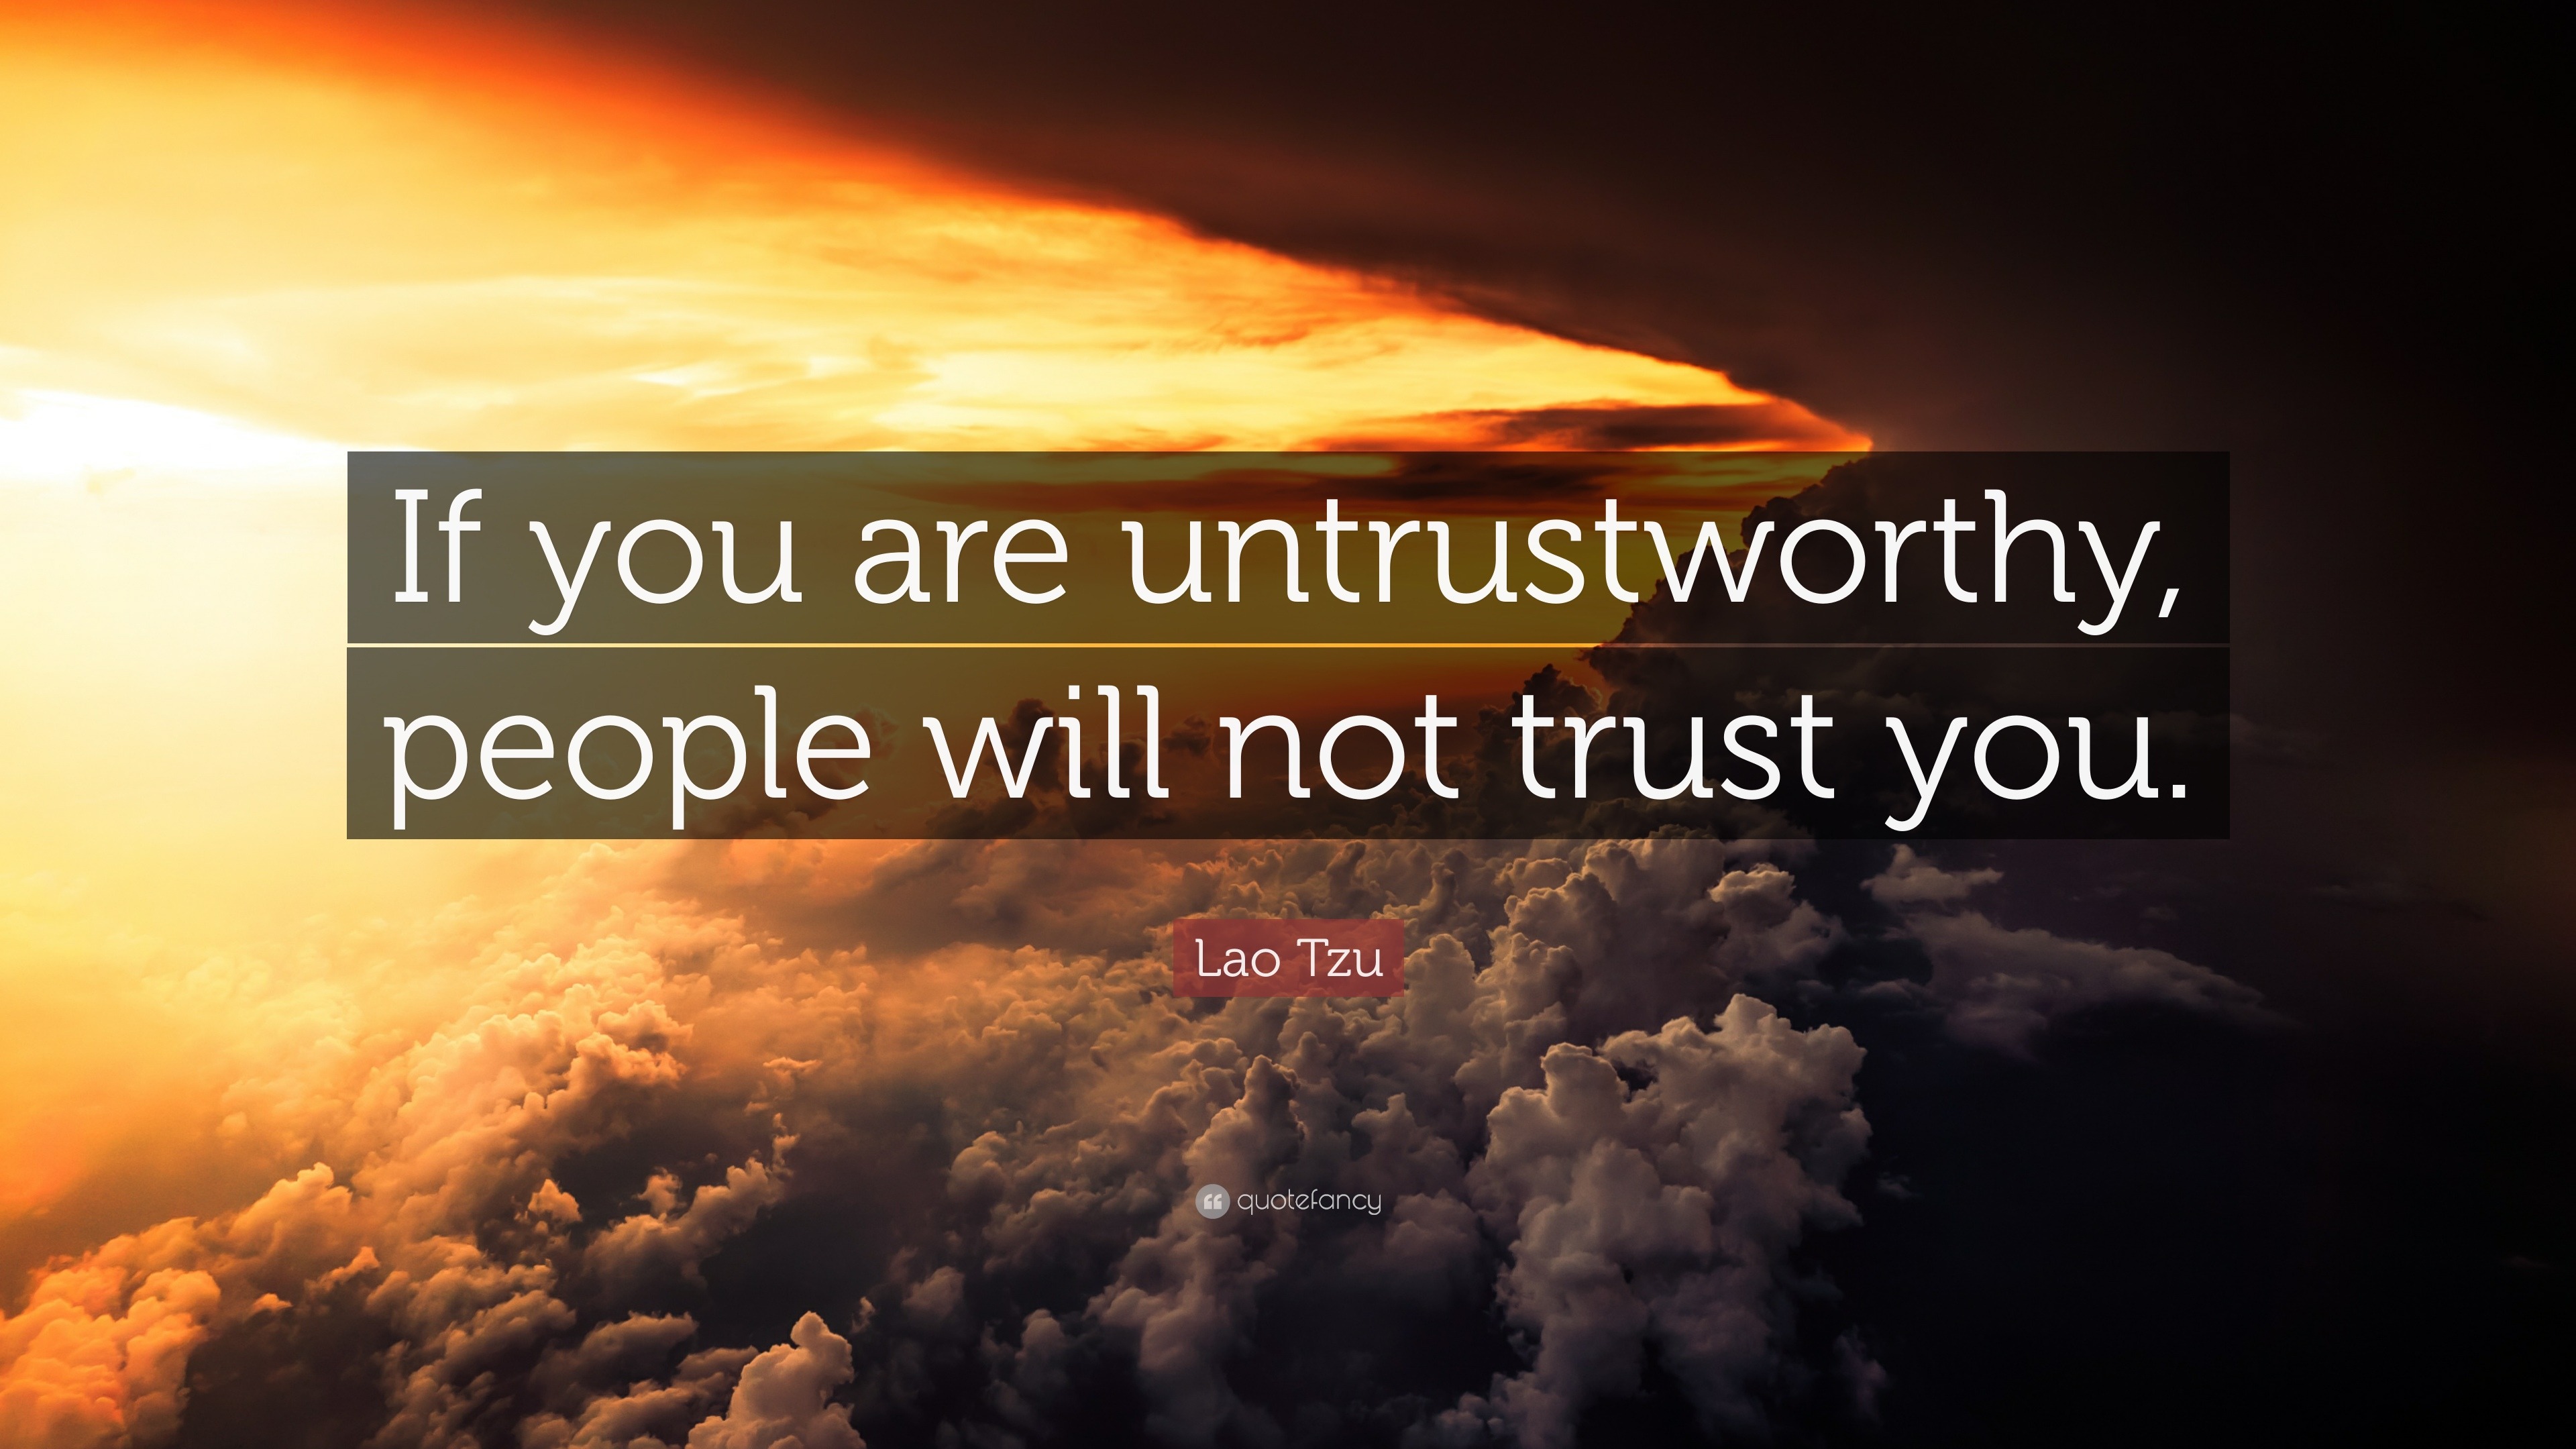 Lao Tzu Quote: “If you are untrustworthy, people will not ...